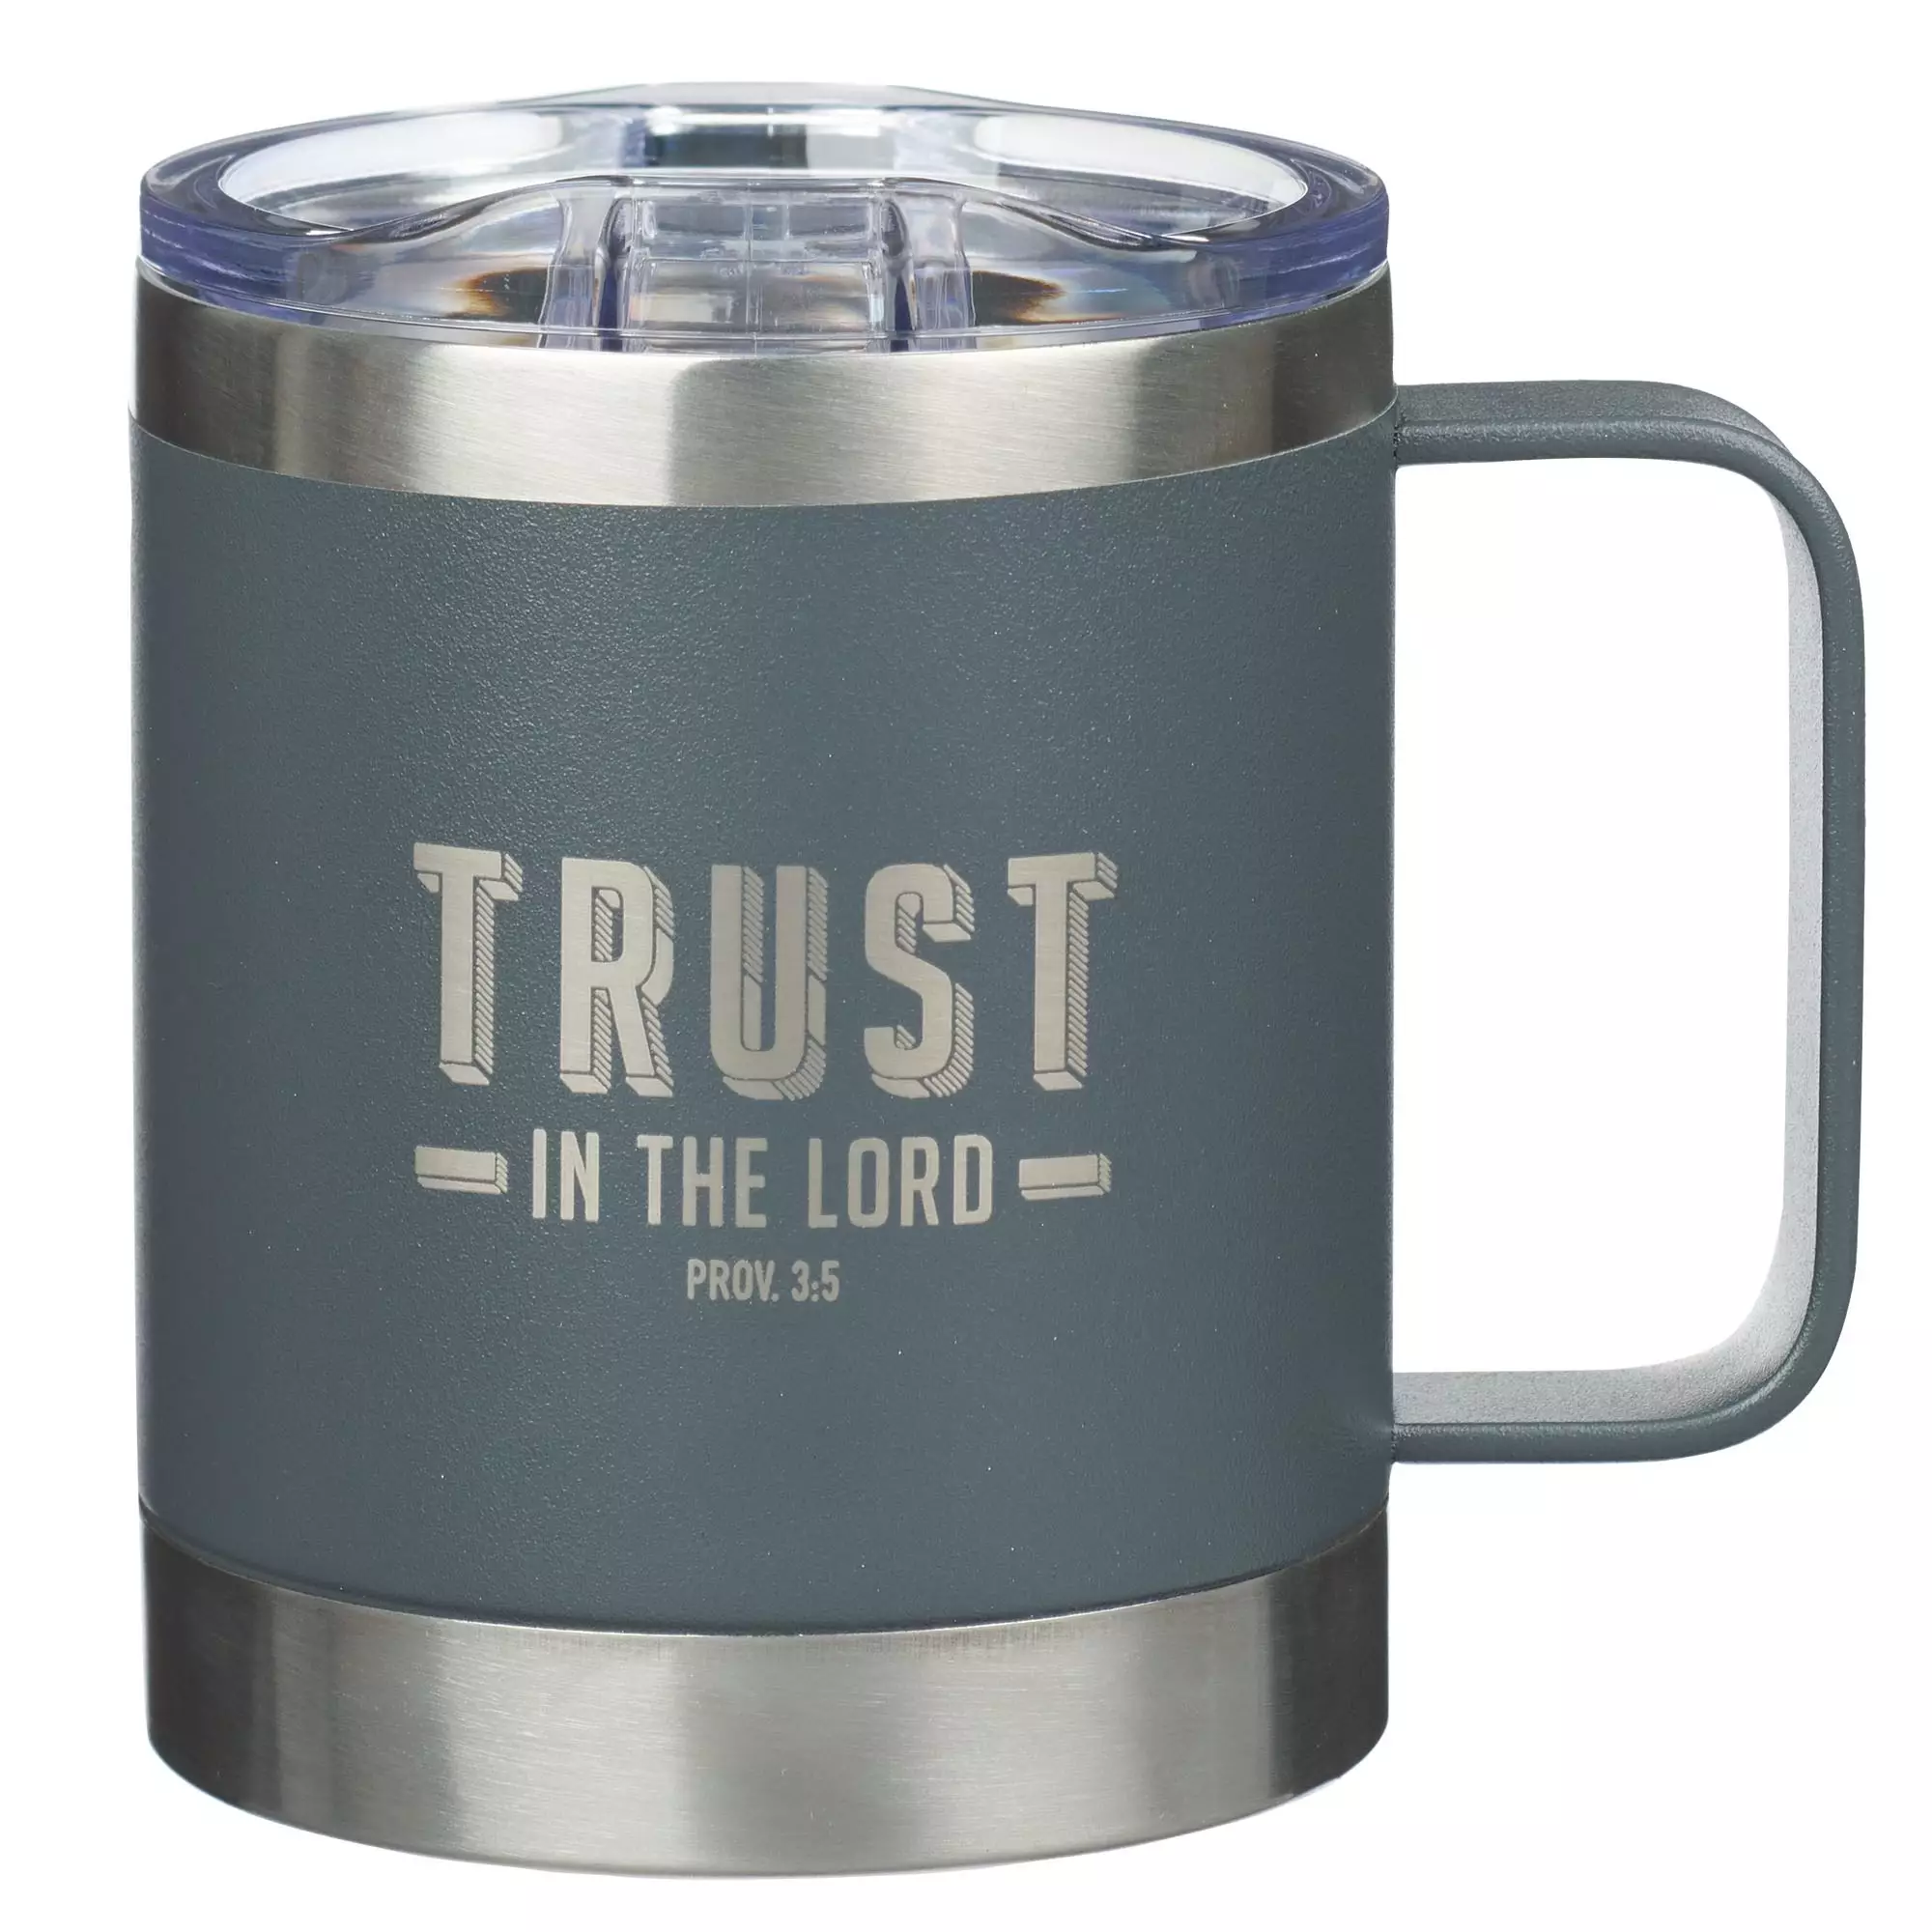 Trust the LORD Cool Grey Camp Style Stainless Steel Mug - Proverbs 3:5